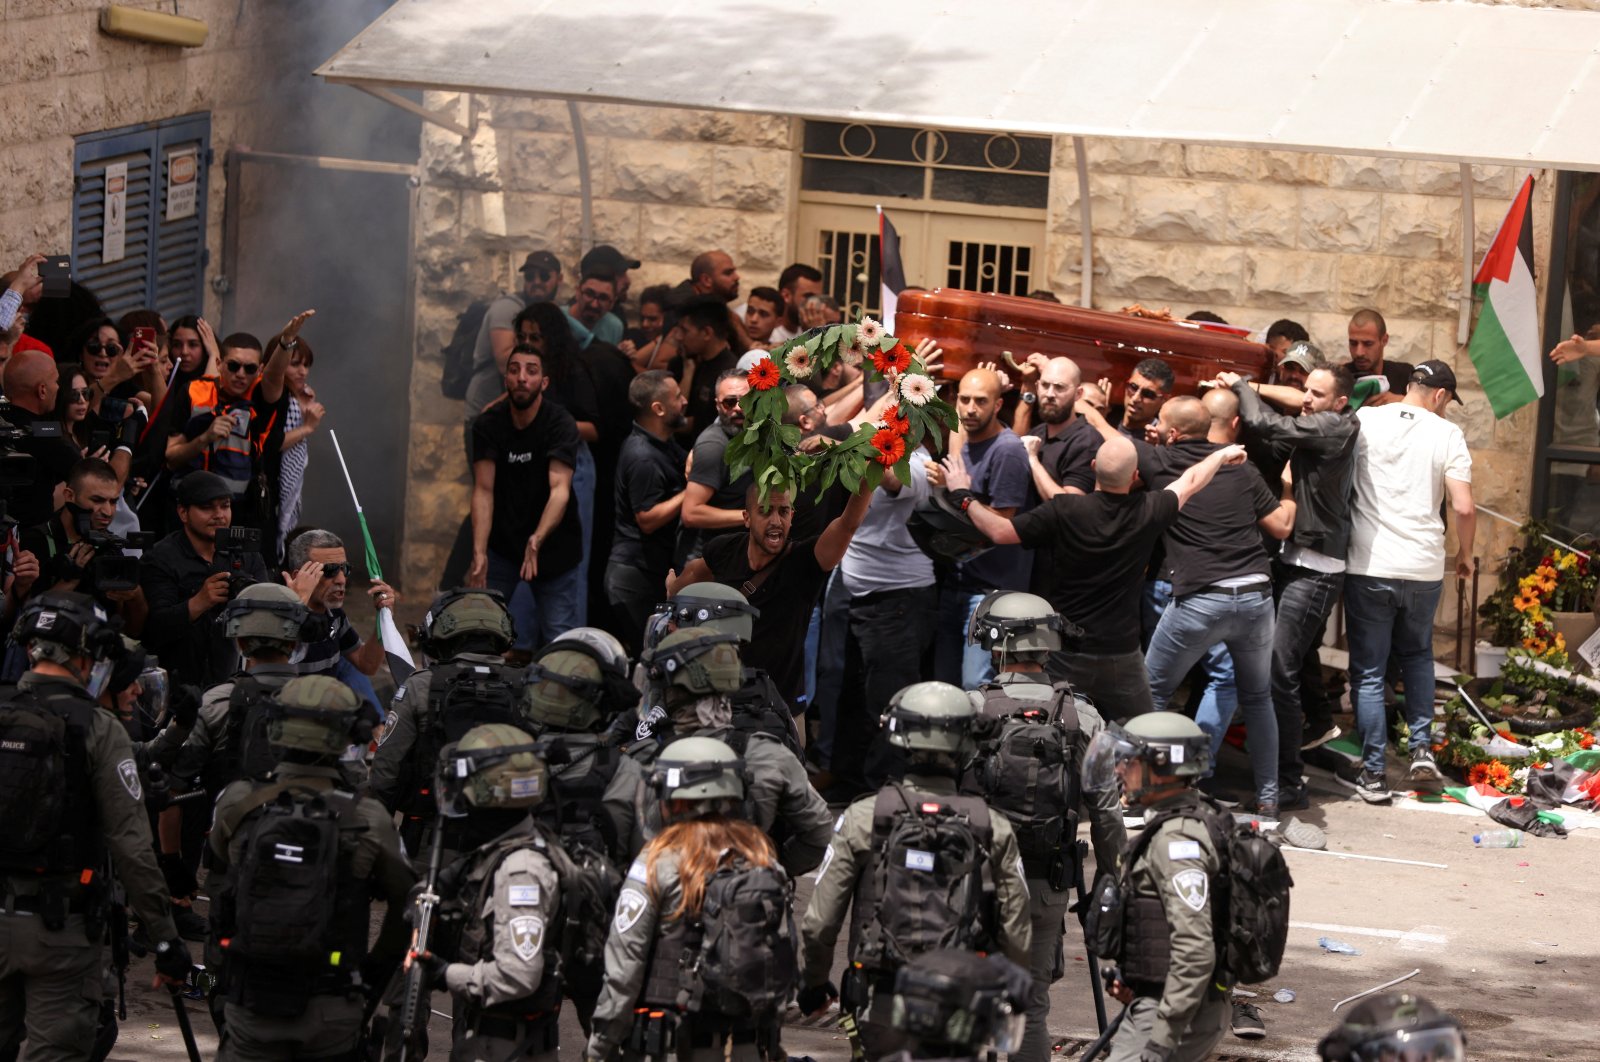 Family and friends carry the coffin of Al-Jazeera reporter Shireen Abu Akleh, who was killed during an Israeli raid in Jenin in the occupied West Bank, next to Israeli security forces, during her funeral in occupied East Jerusalem, Palestine, May 13, 2022. (Reuters Photo)